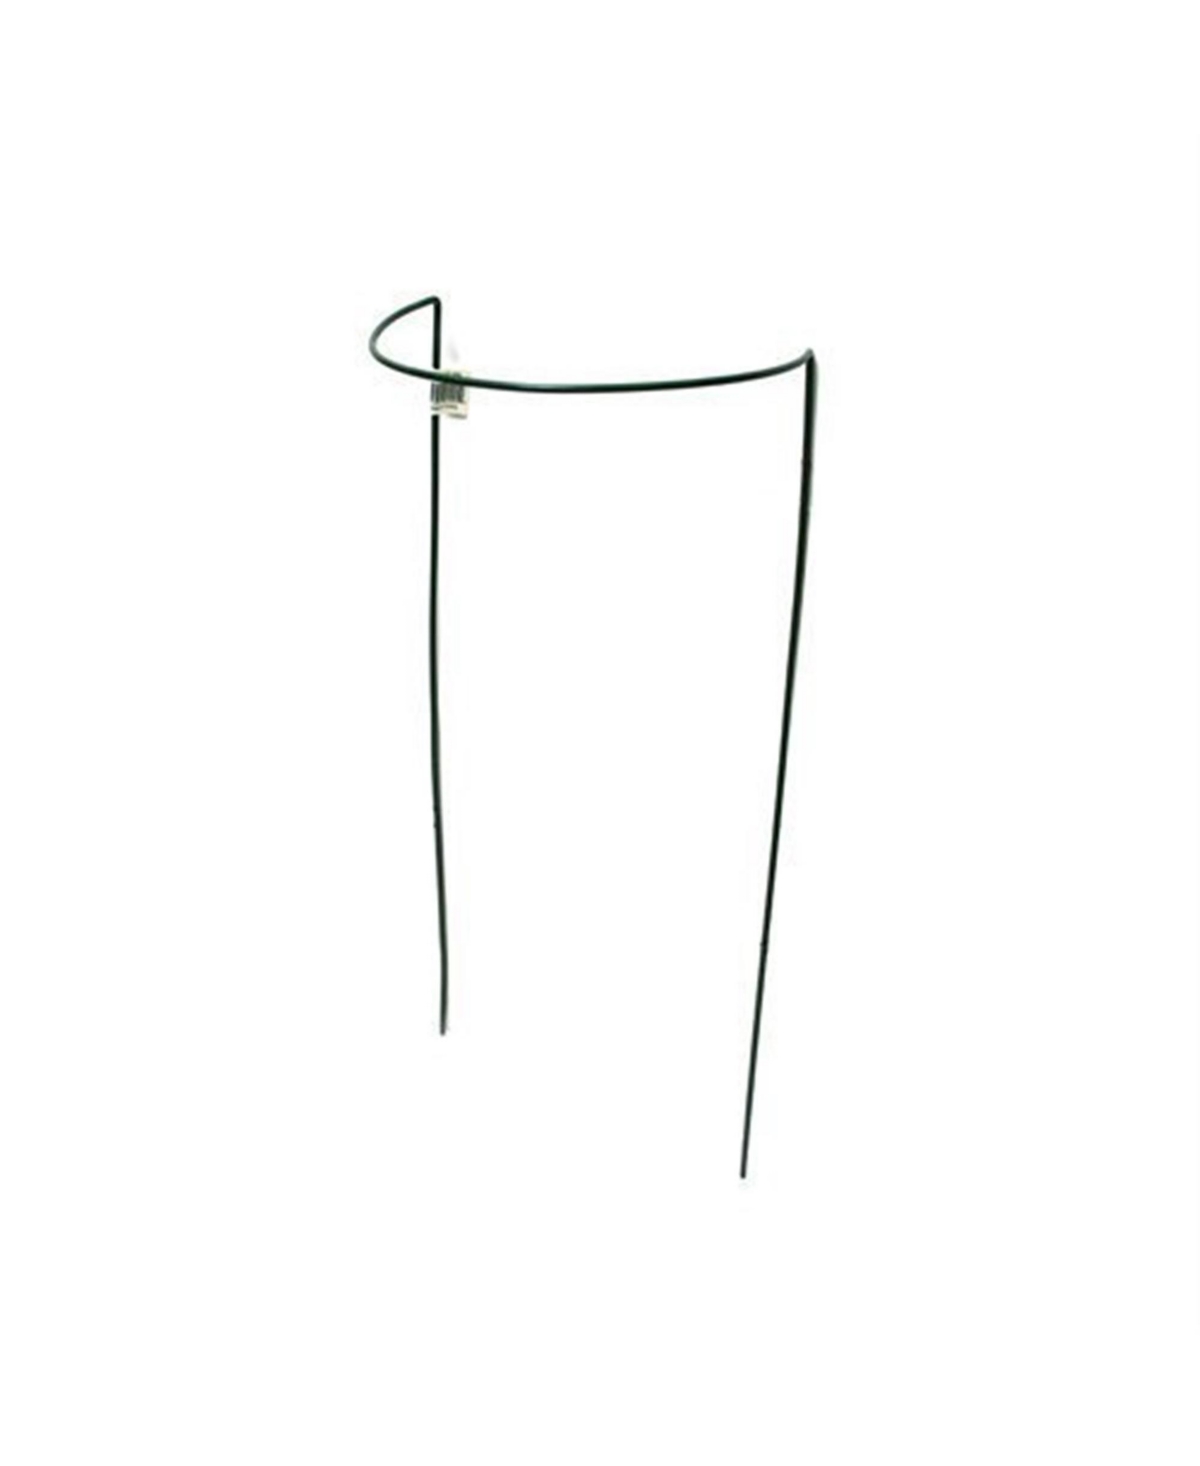 Luster Leaf 1045 Link-Ups Plant Support, Green Vinyl, 15 x 30-In. - Green